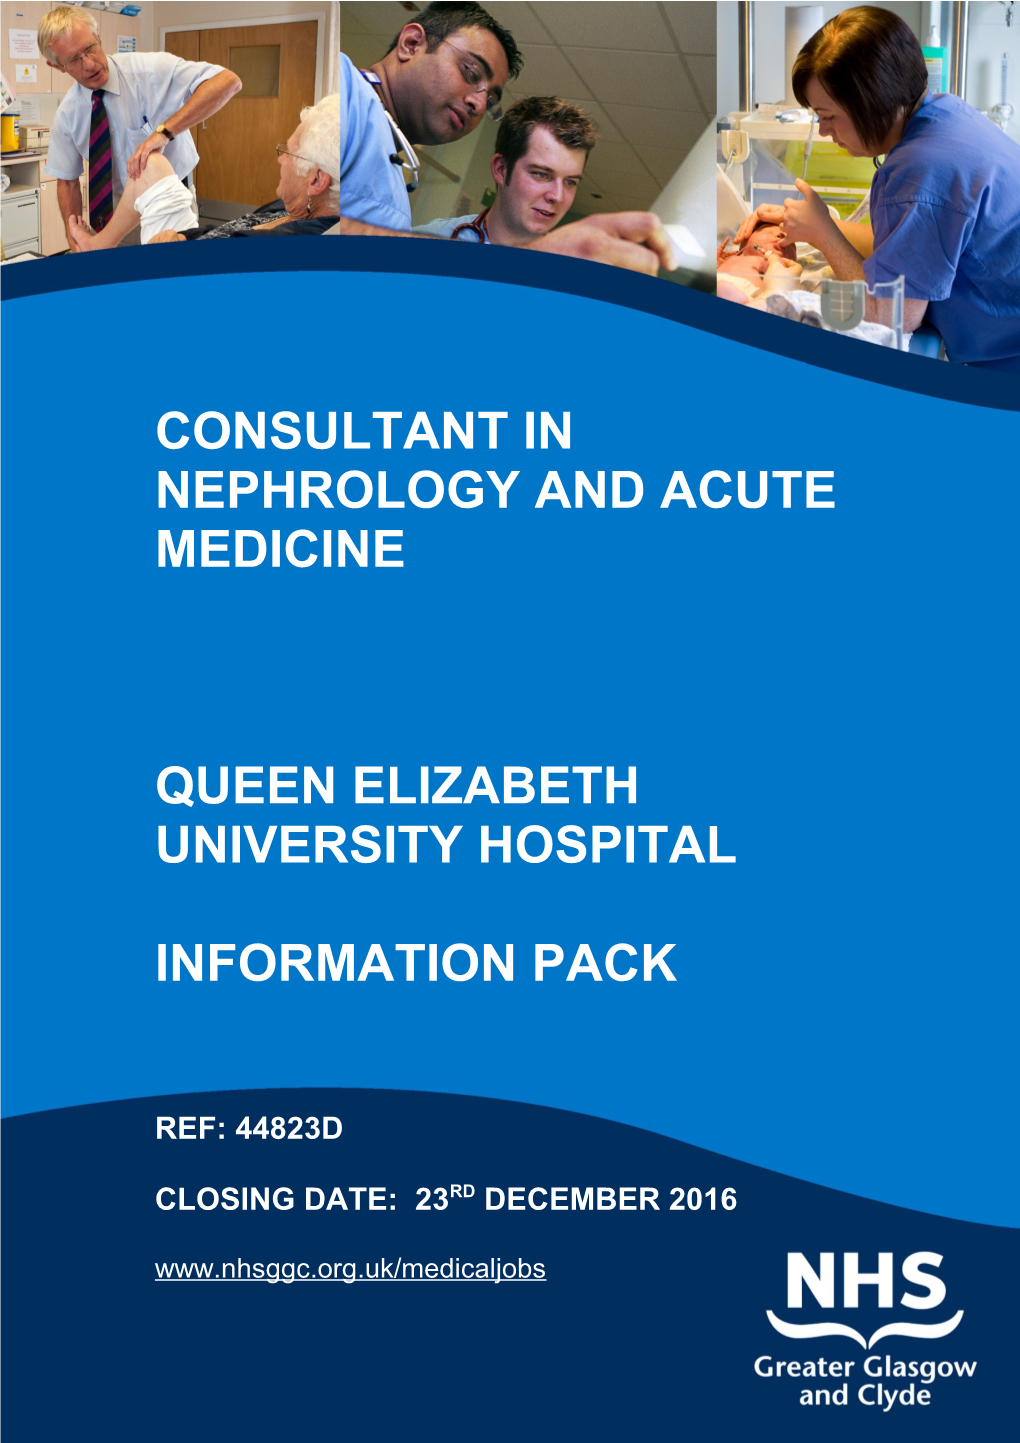 Consultant in Nephrology and Acute Medicine